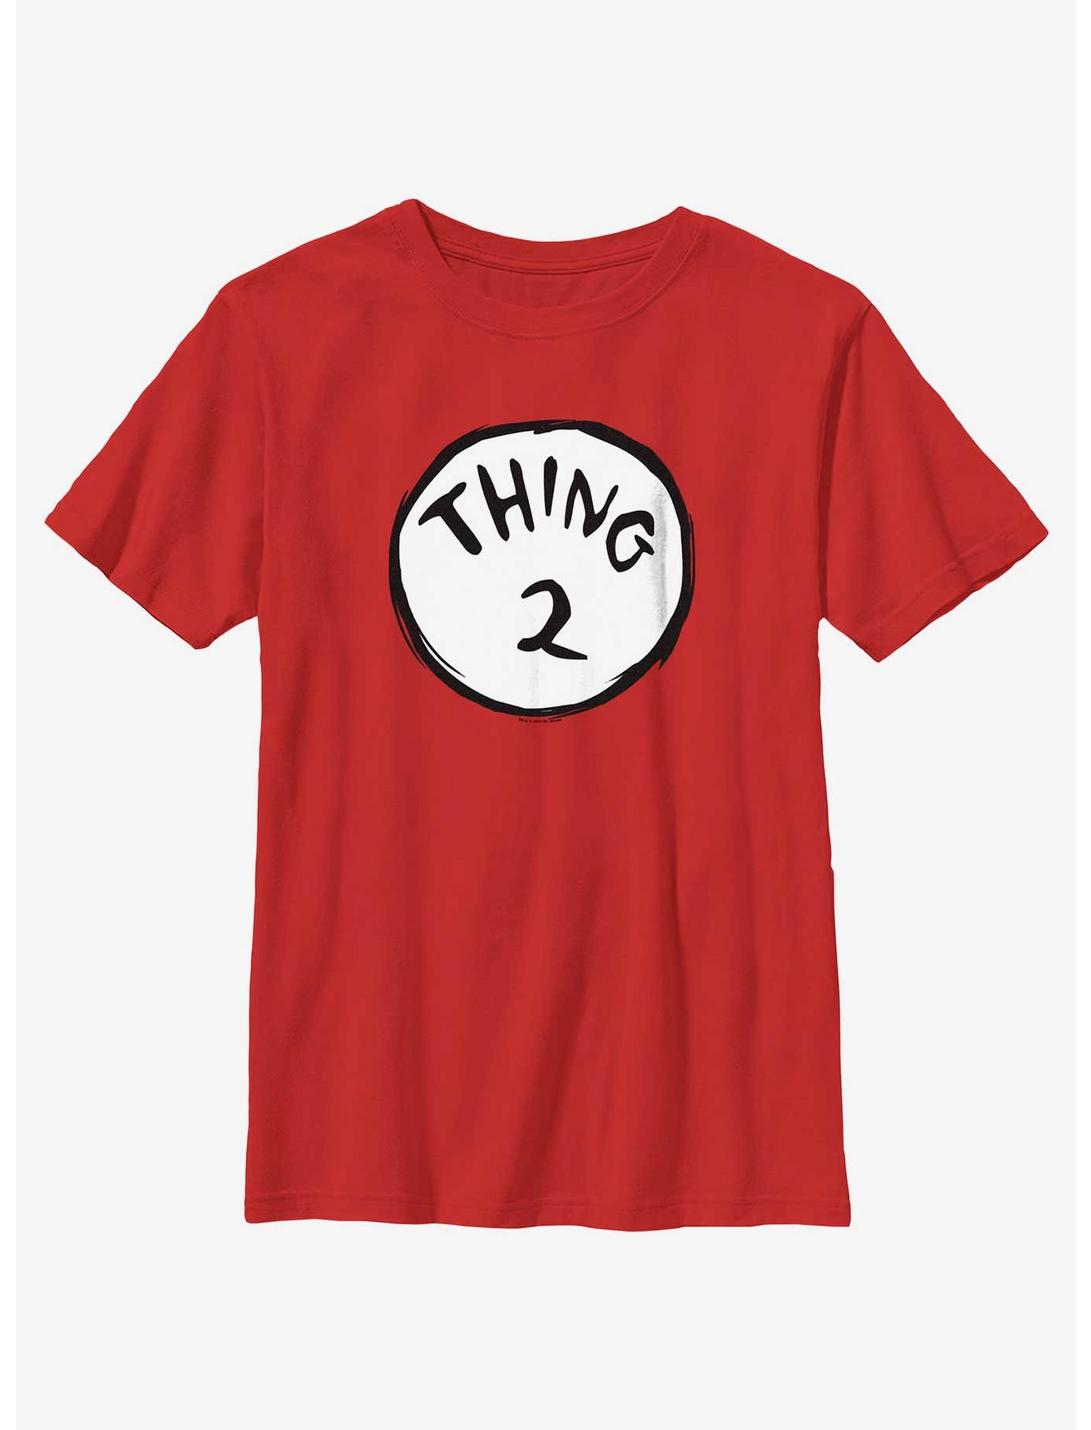 Dr. Seuss's Cat In The Hat Thing 2 Youth T-Shirt, RED, hi-res